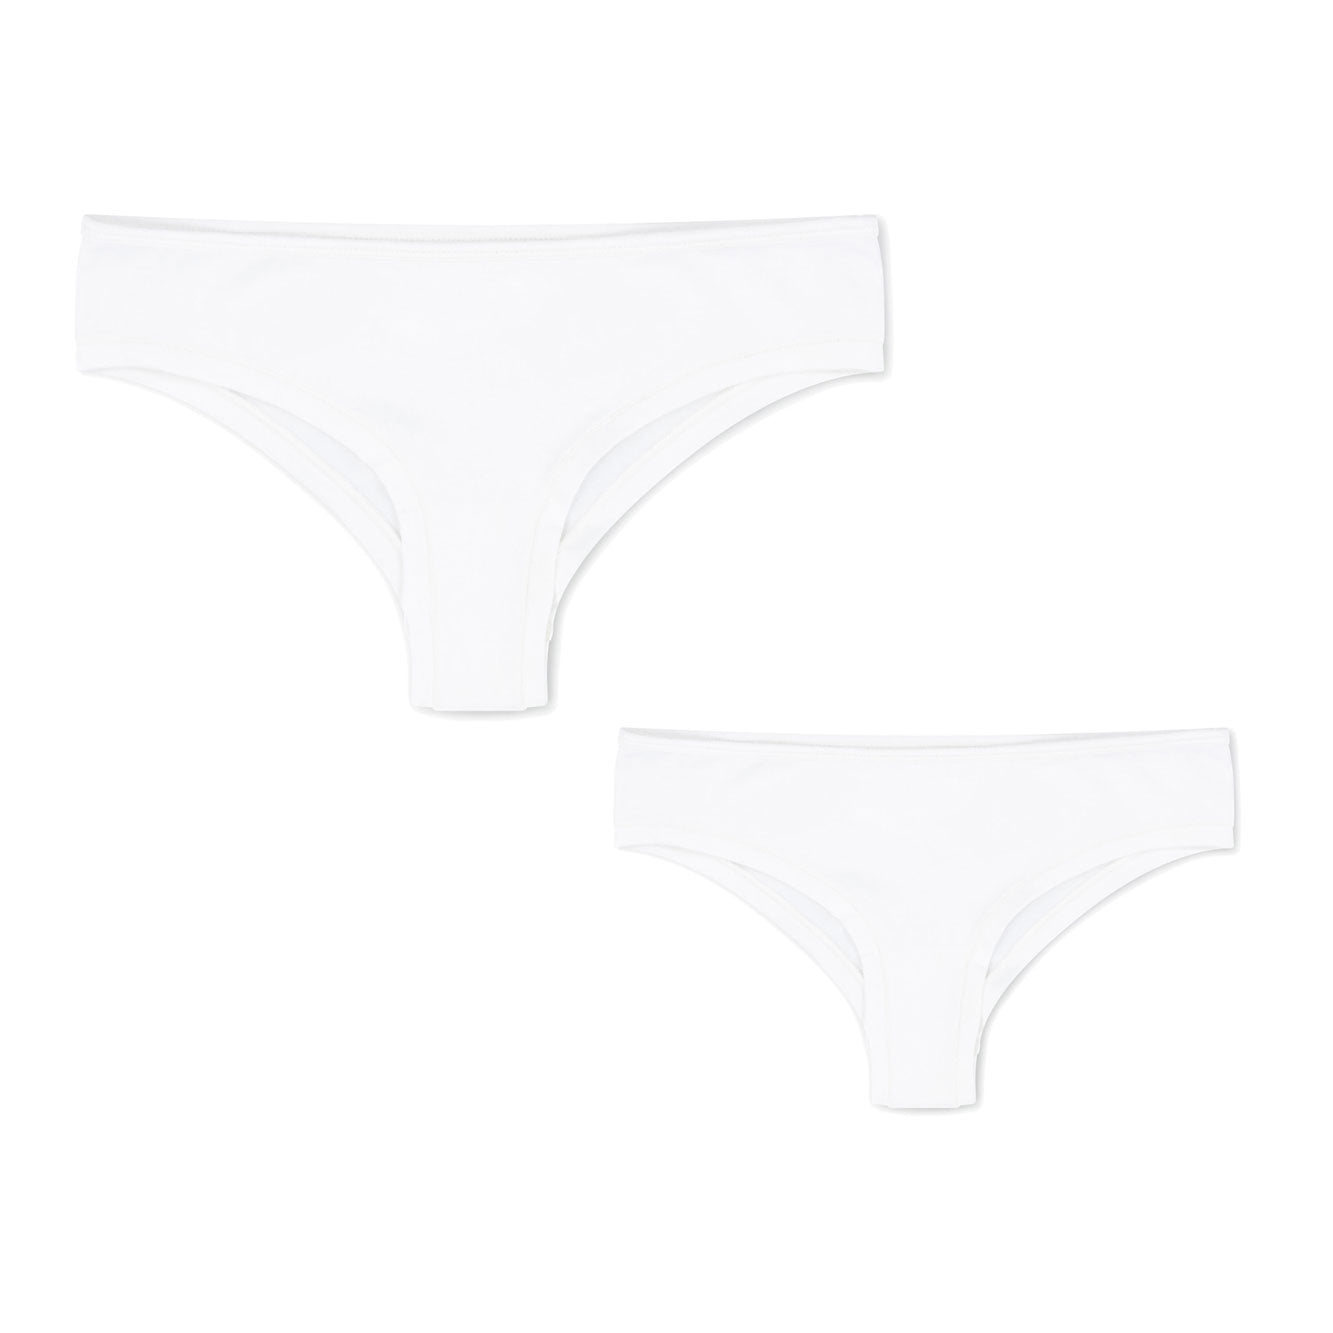 white ladies underwear, everyday cheeky fit briefs, first fit promise 2 pack